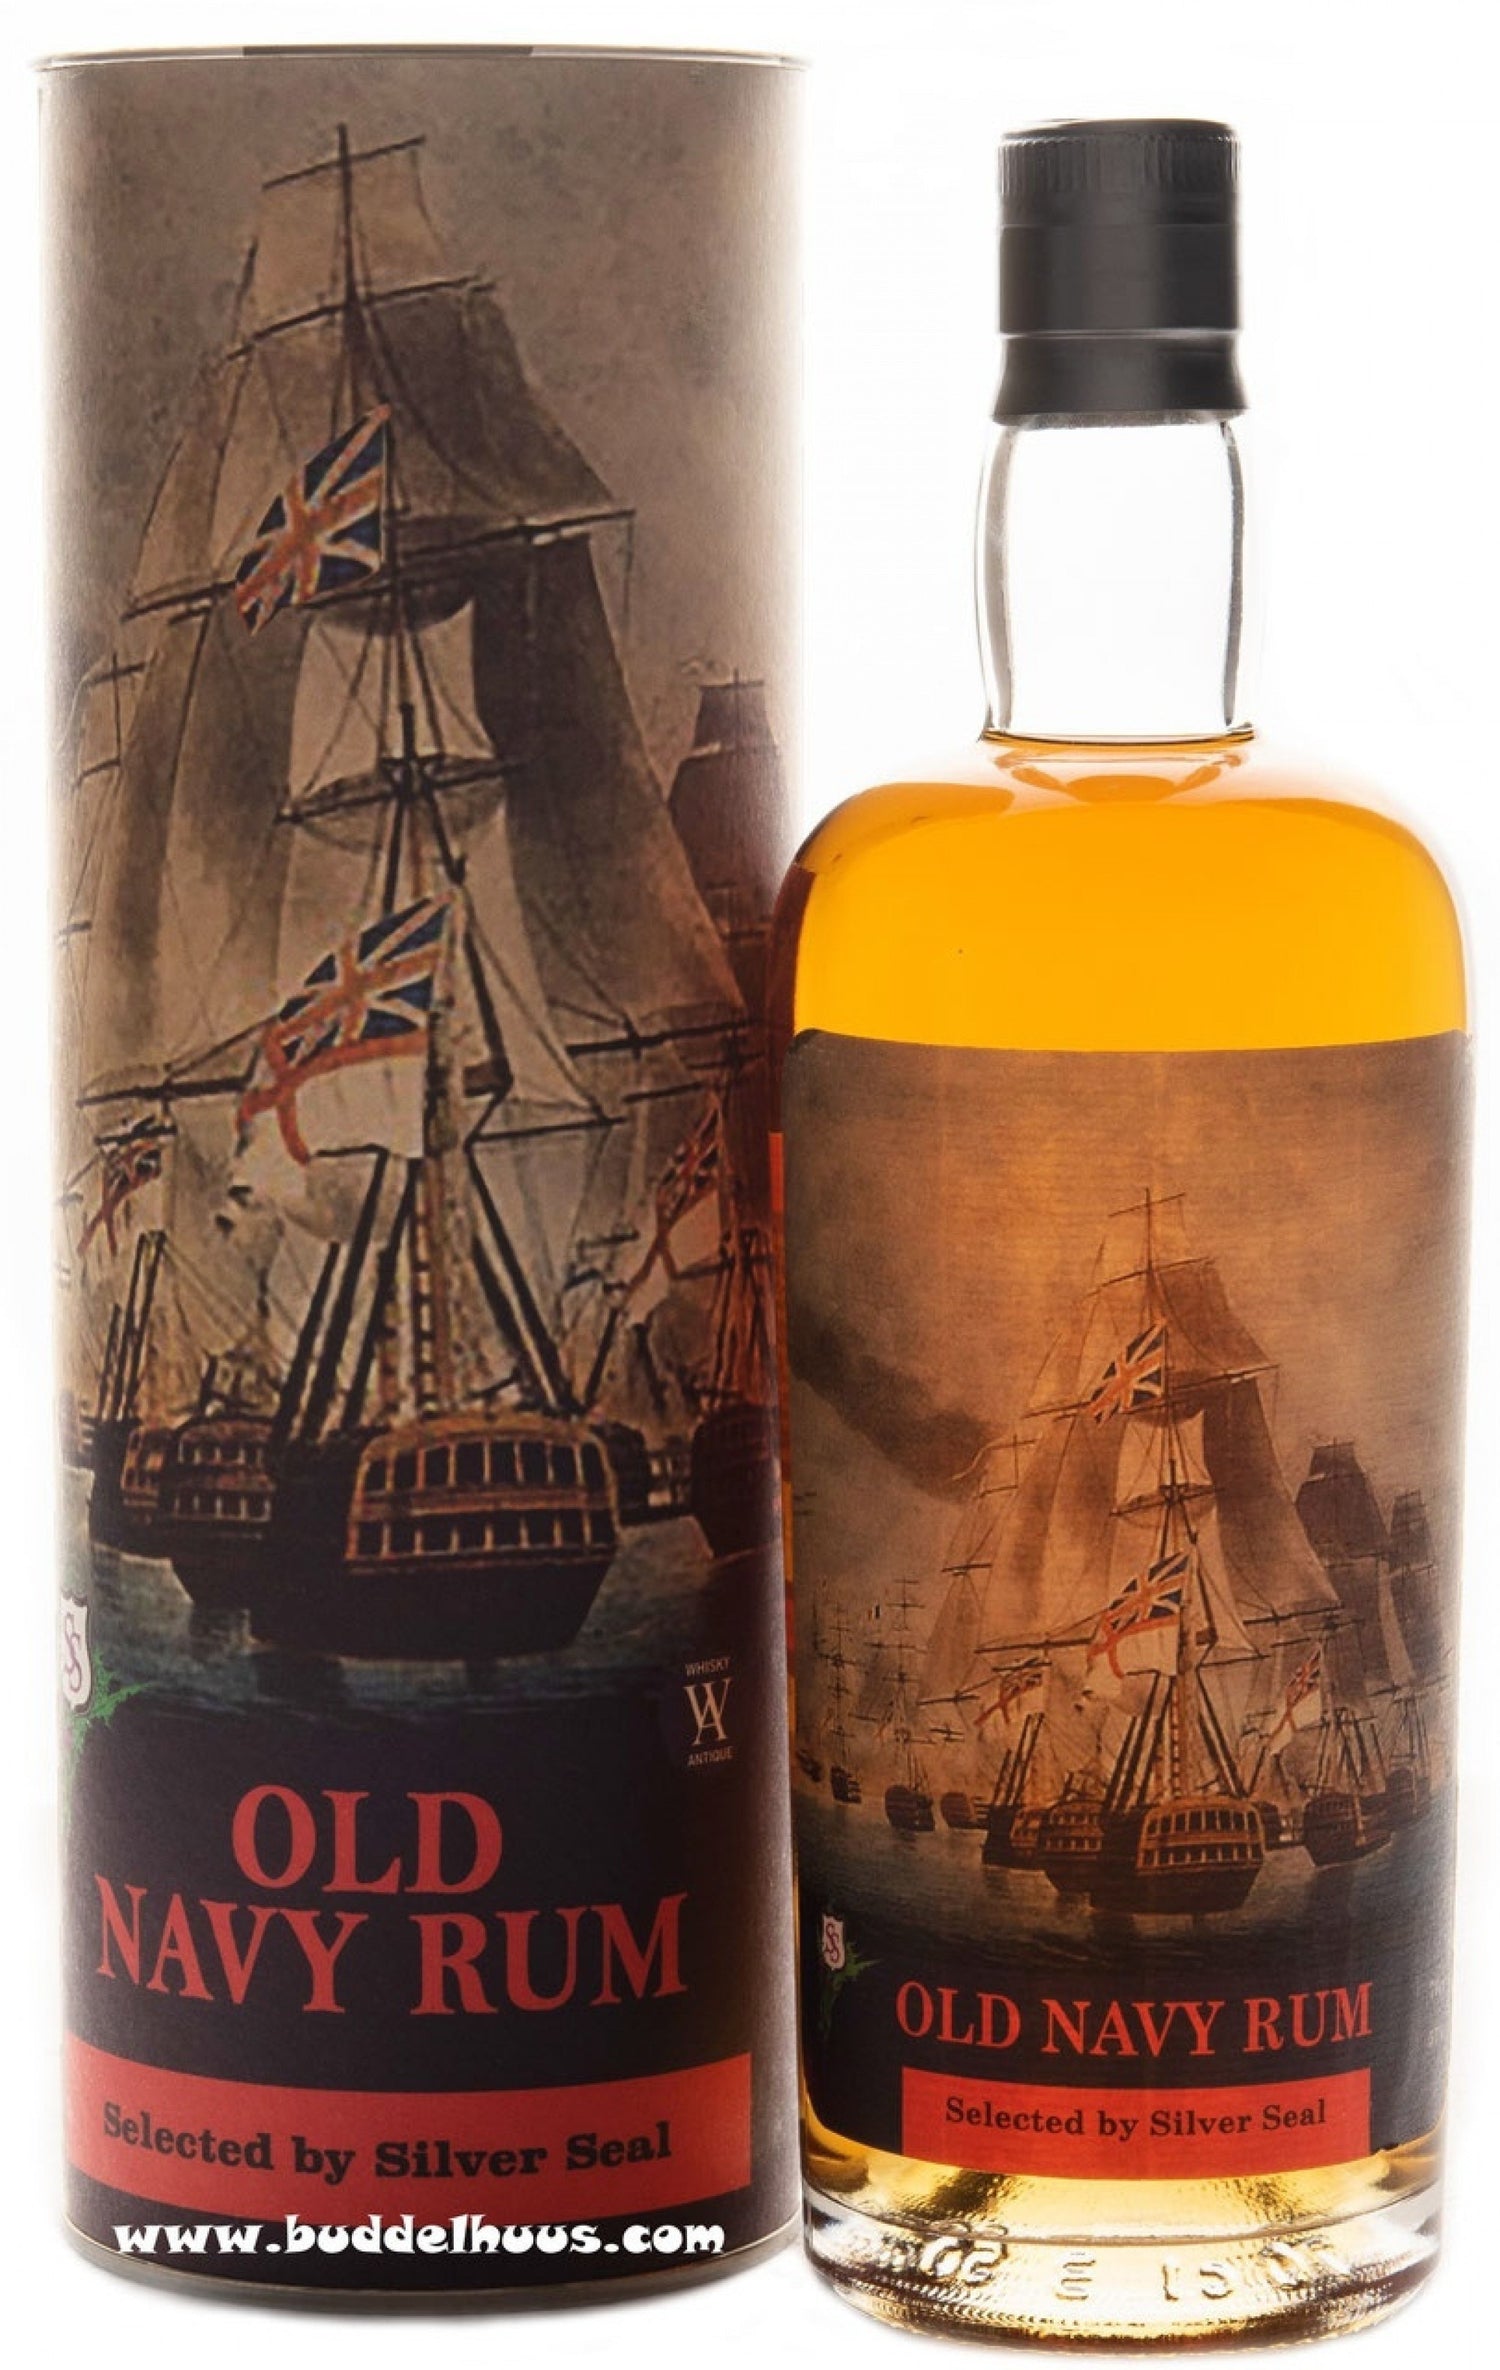 Silver Seal Old Navy Rum 2018